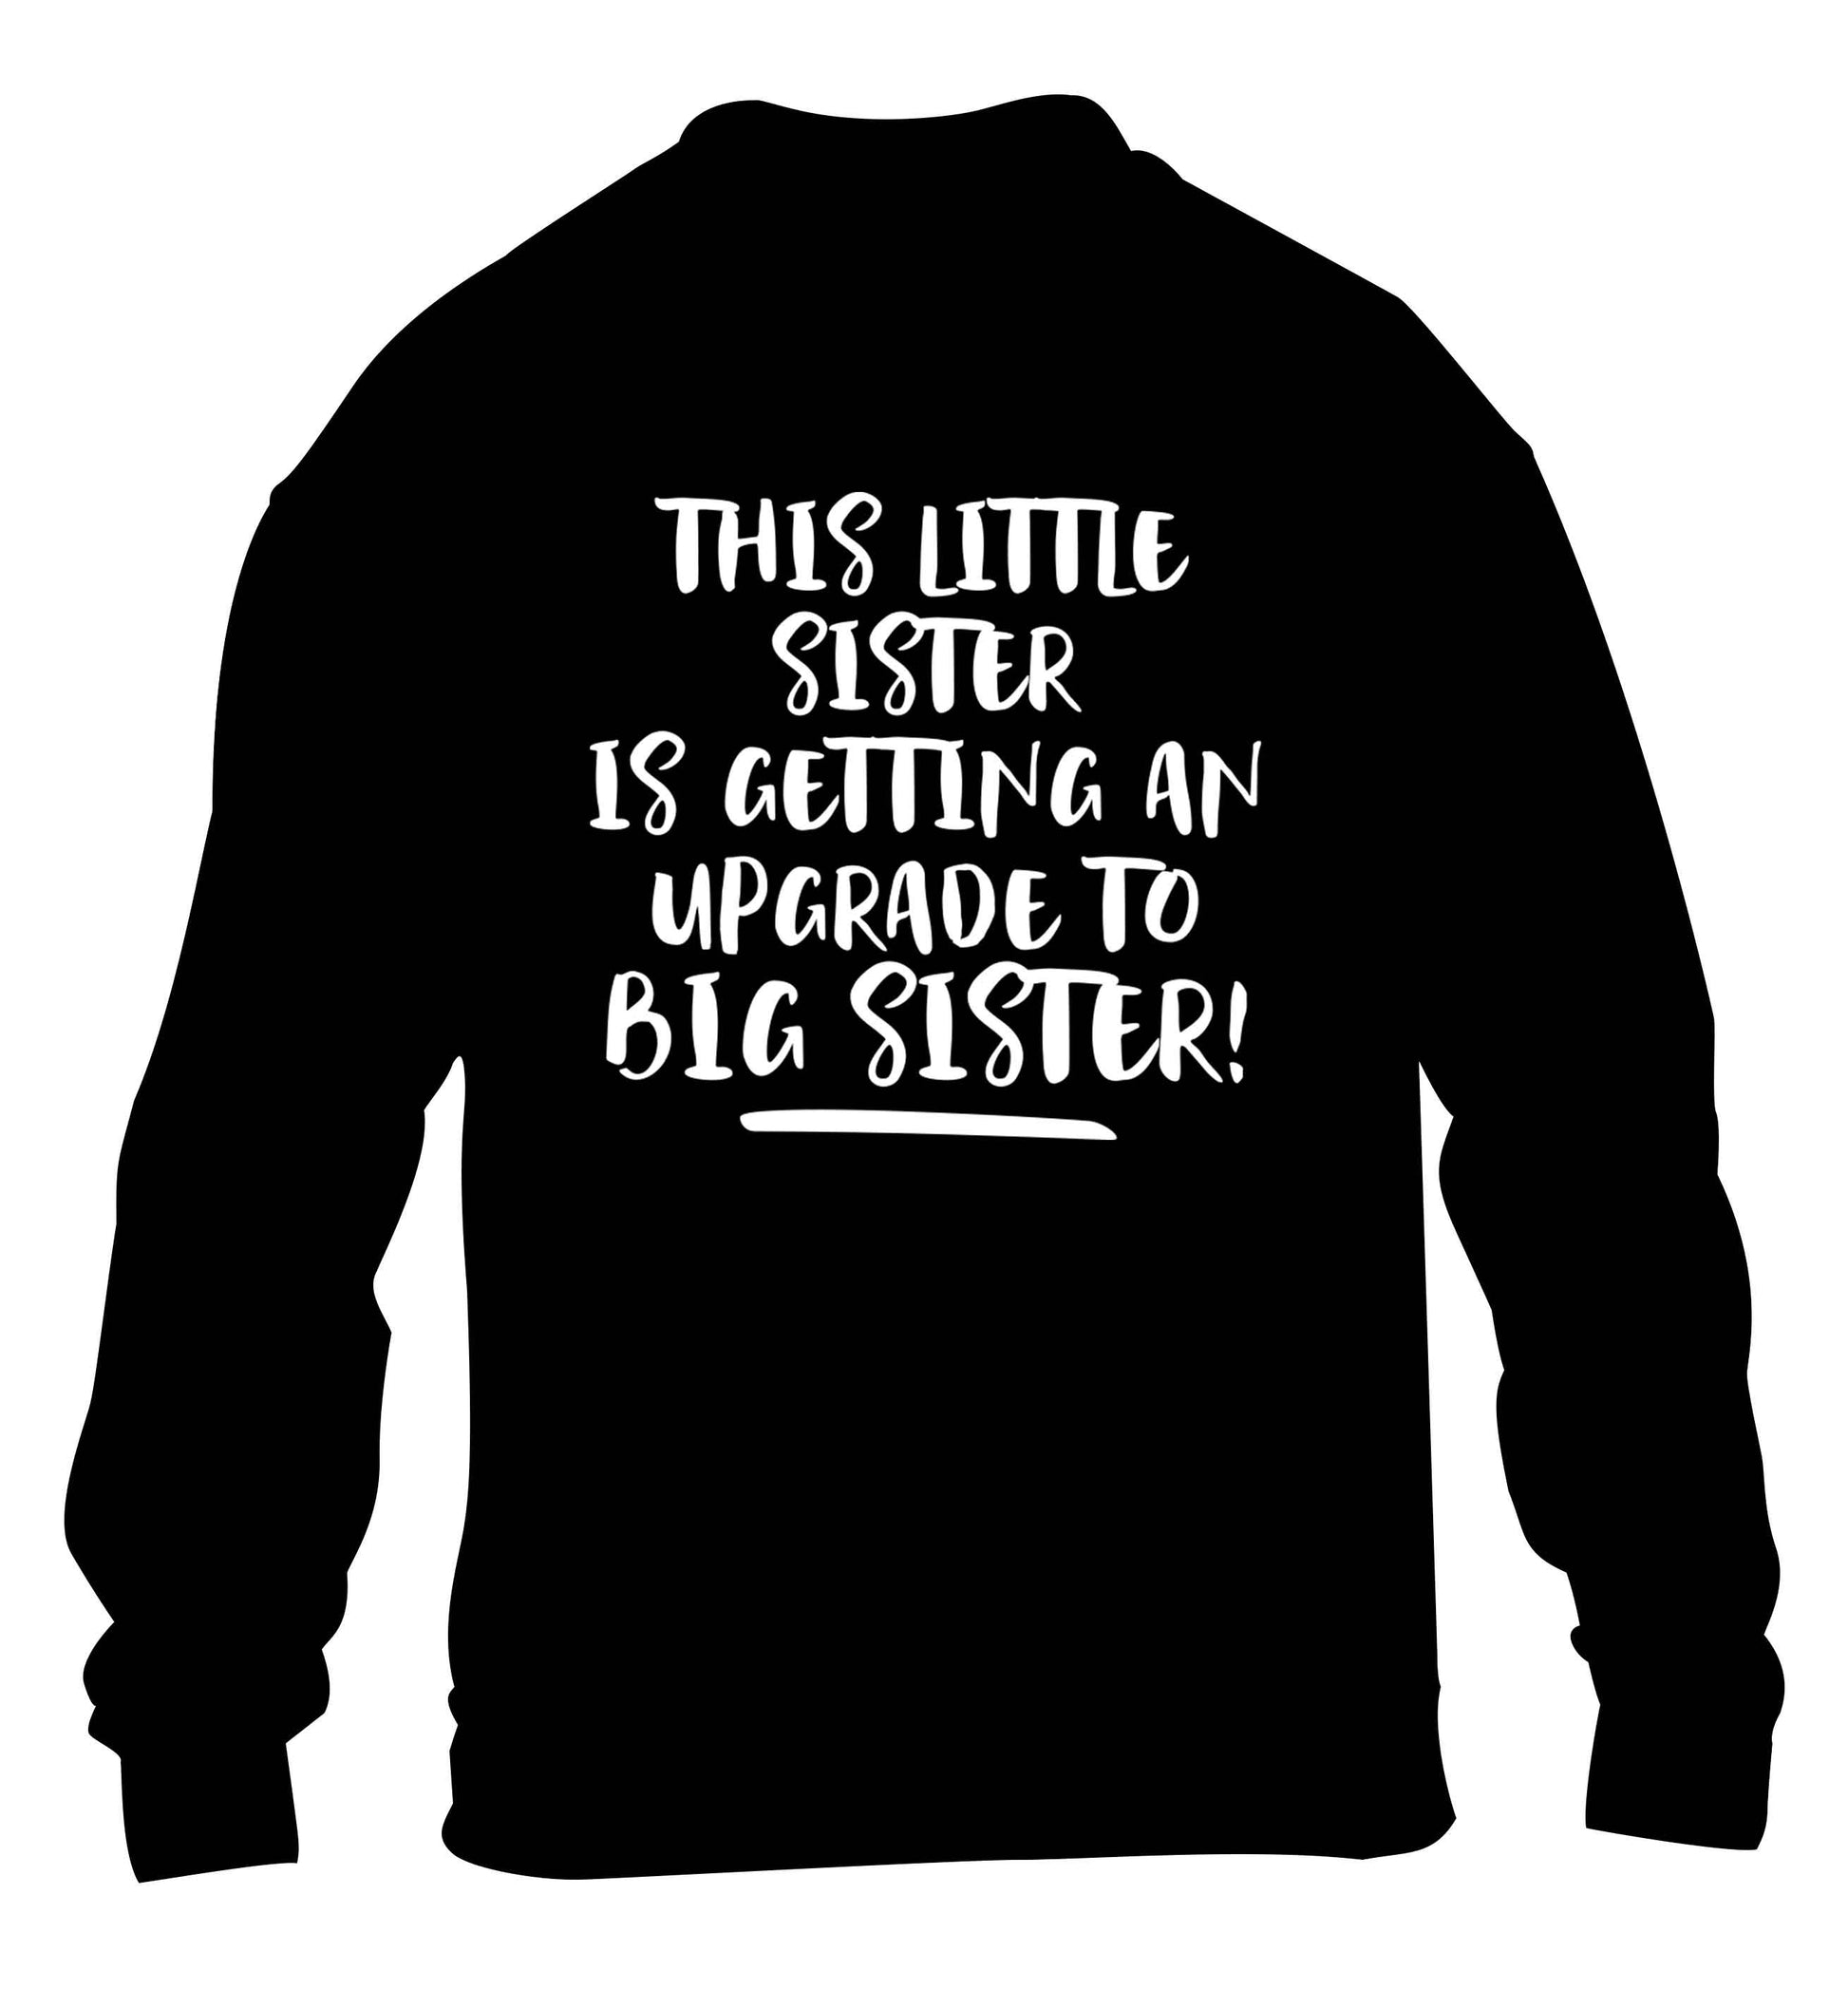 This little sister is getting an upgrade to big sister! children's black sweater 12-13 Years